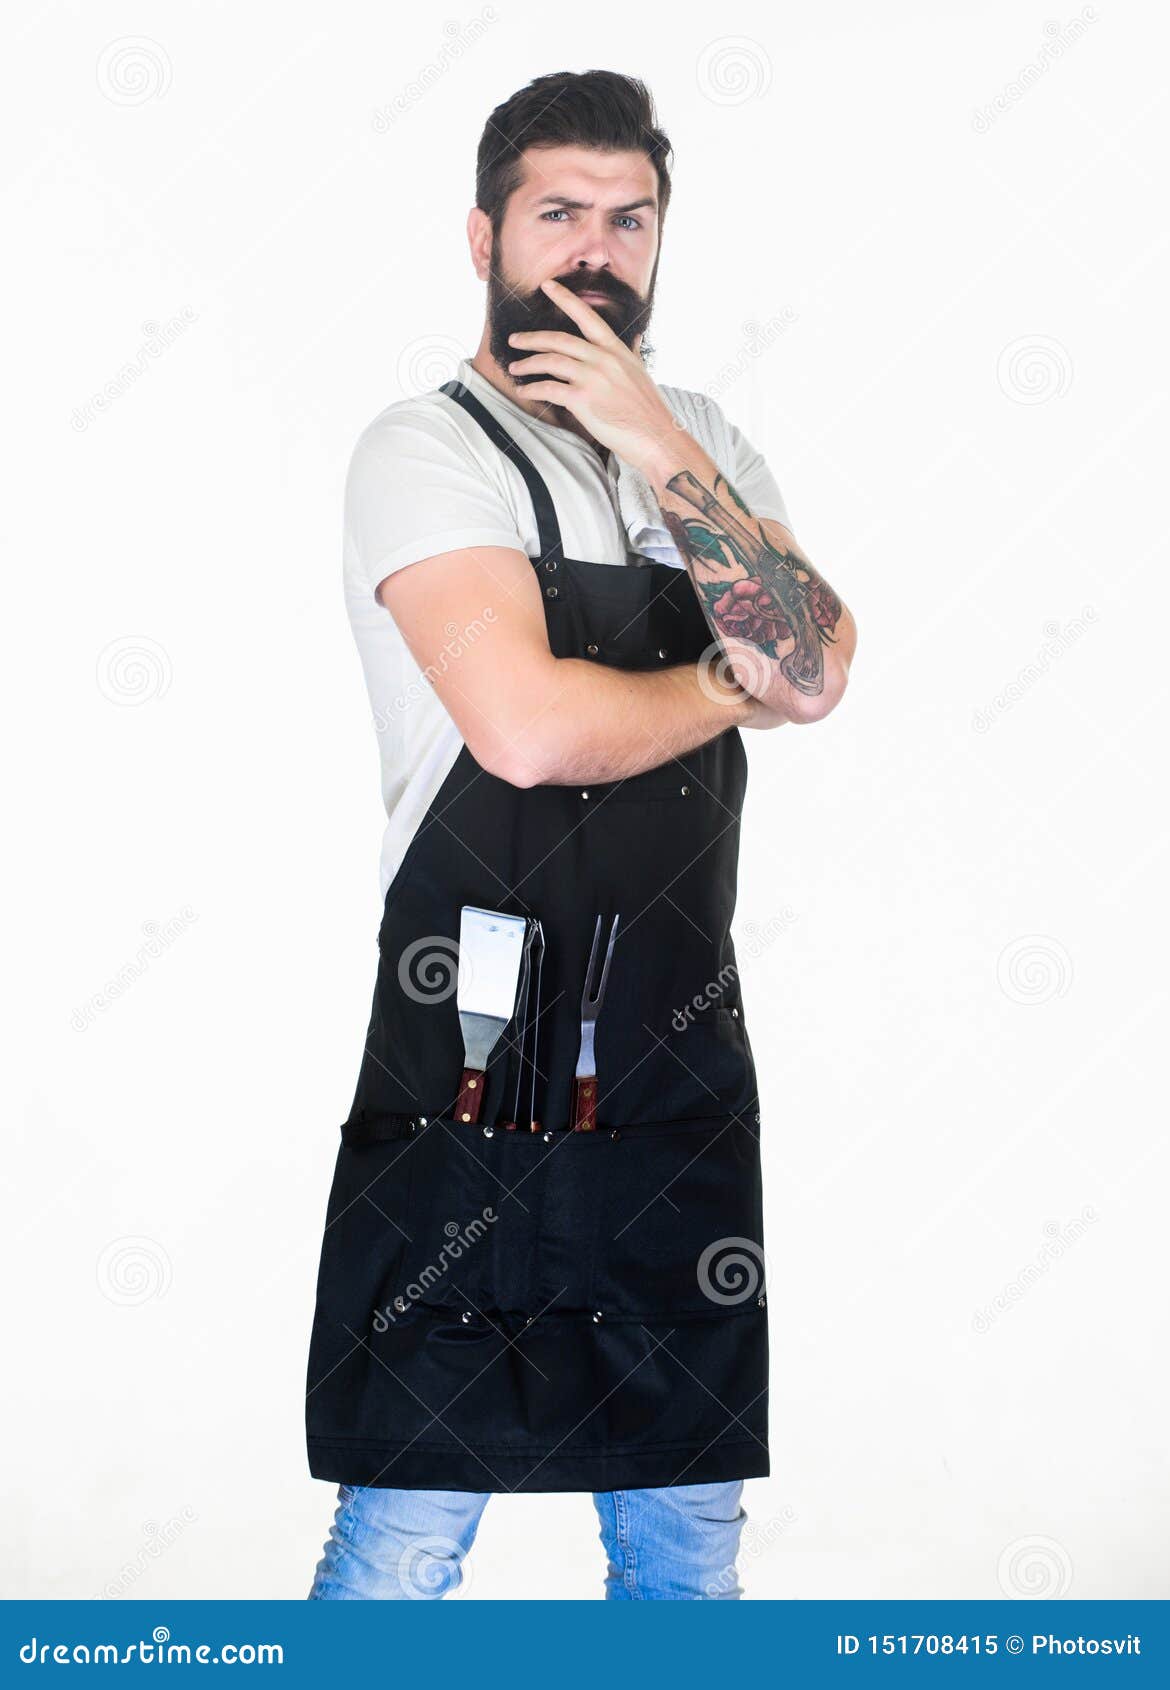 Cooking Food On Grill Using A Barbecue Set Grill Cook Bearded Man Wearing Apron With Grill 